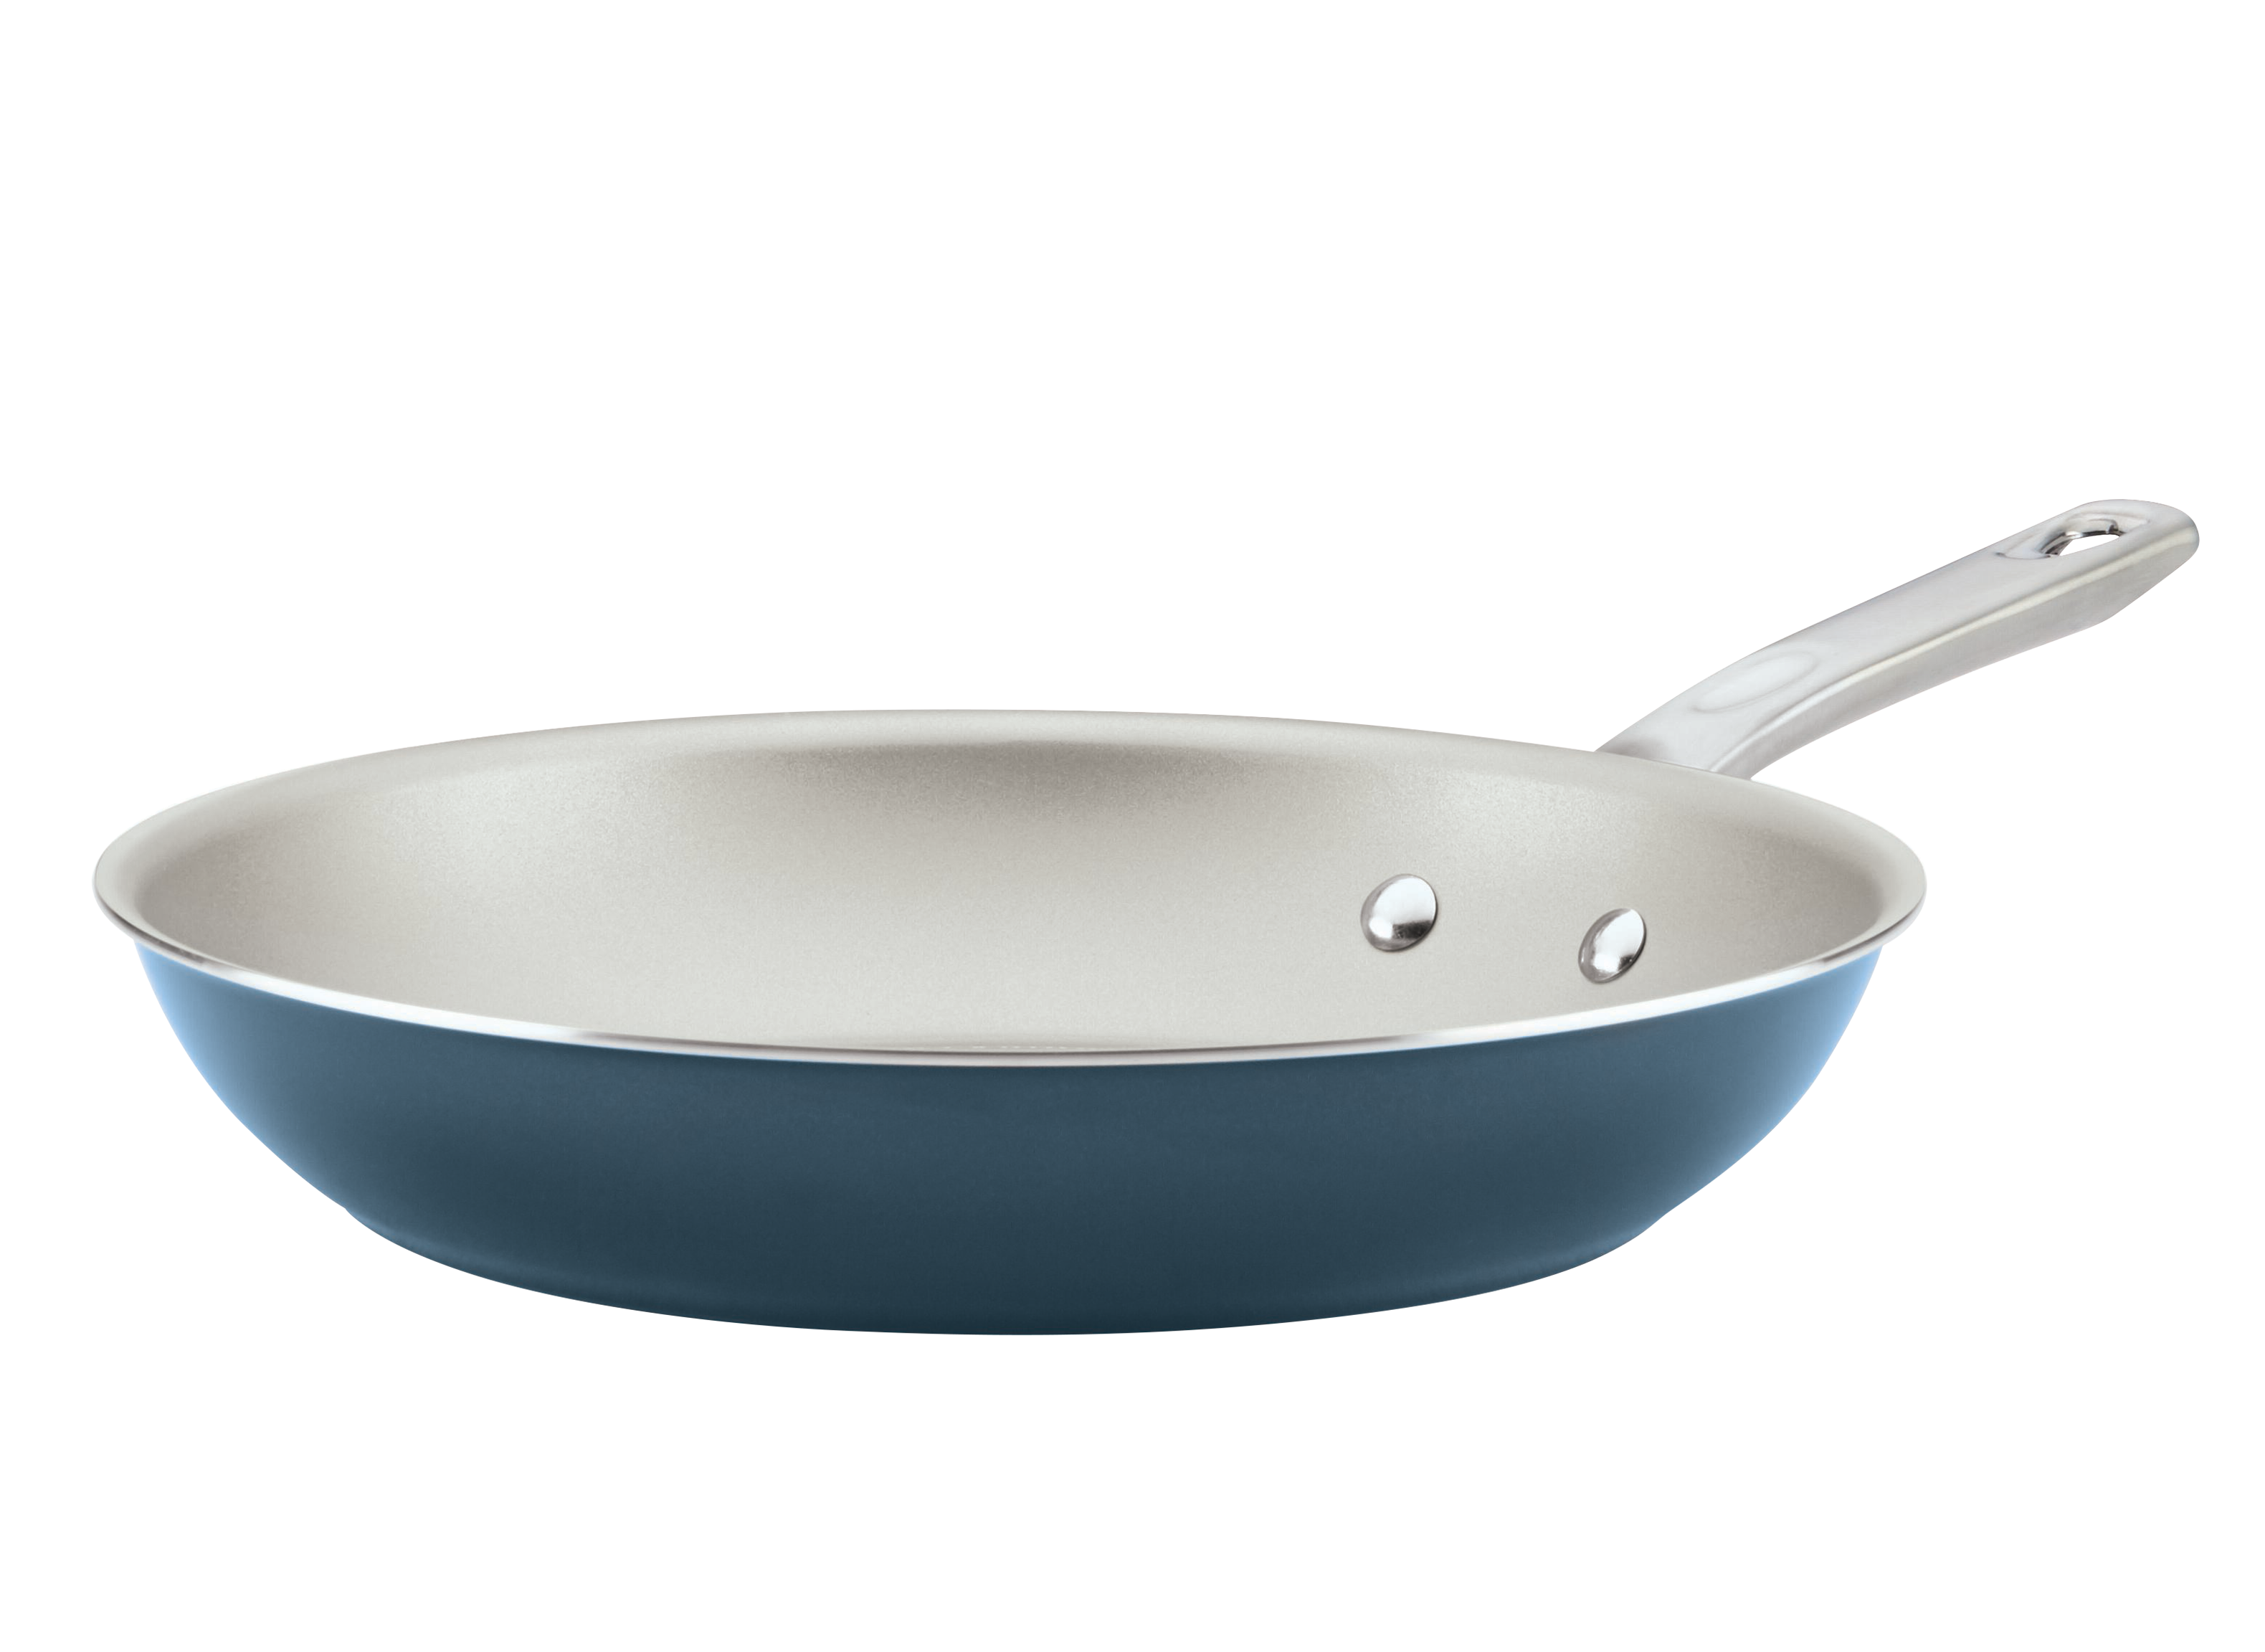 https://crdms.images.consumerreports.org/prod/products/cr/models/394758-frying-pans-ayesha-curry-home-collection-porcelain-enamel-10-skillet-nonstick-10000334.png